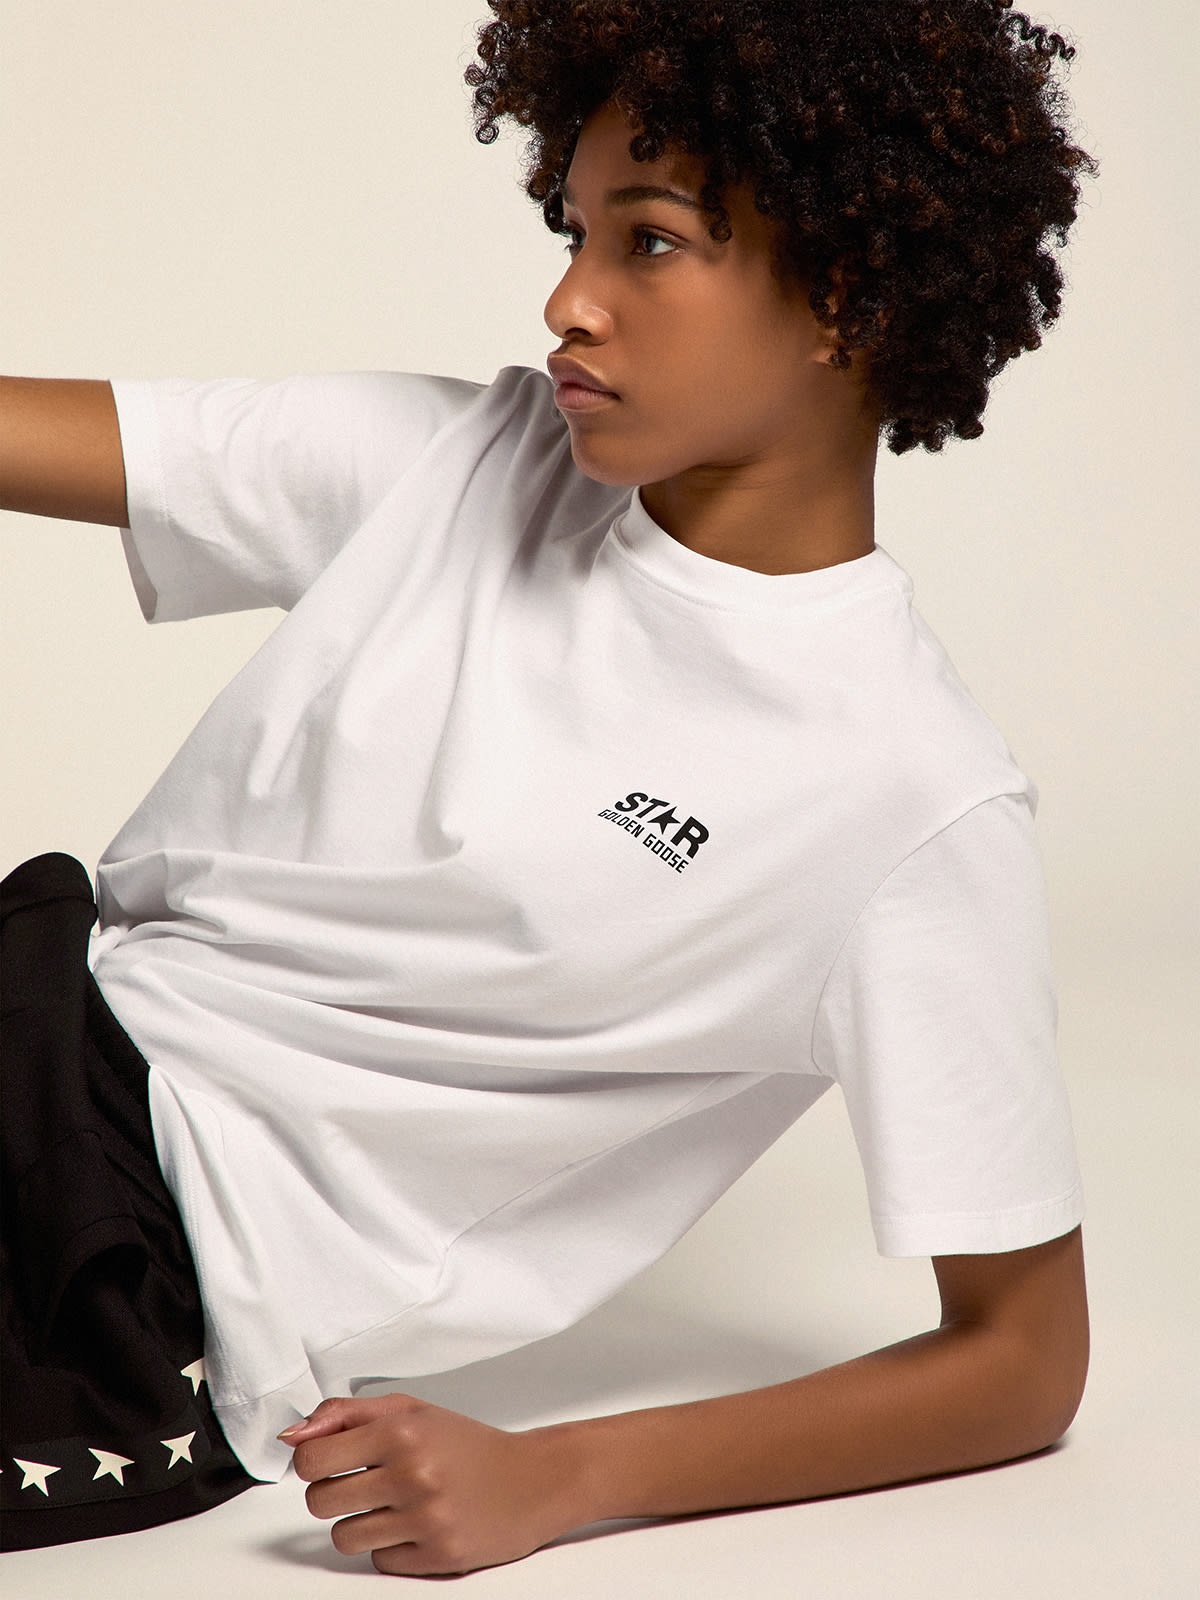 Women's white T-shirt with contrasting black logo and star - 3